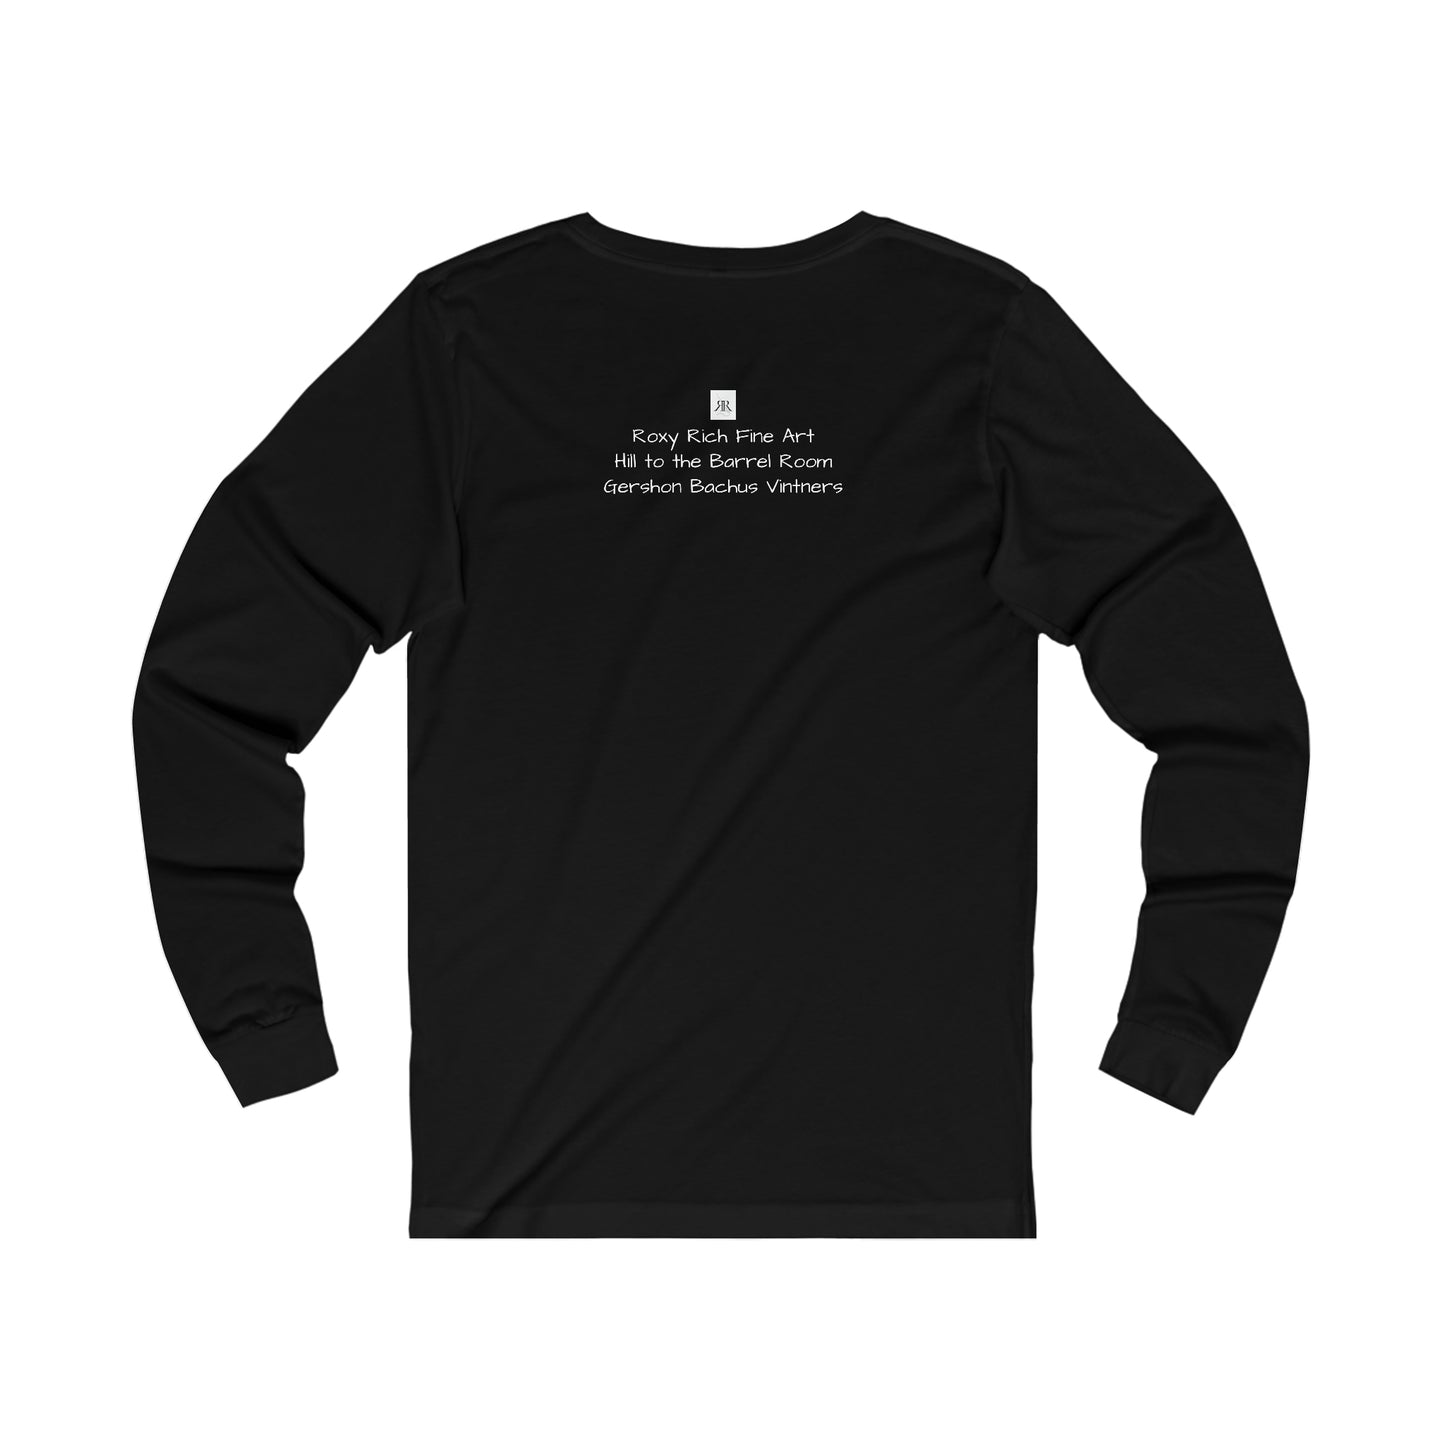 Hill to the Barrel Room at GBV Unisex Jersey Long Sleeve Tee